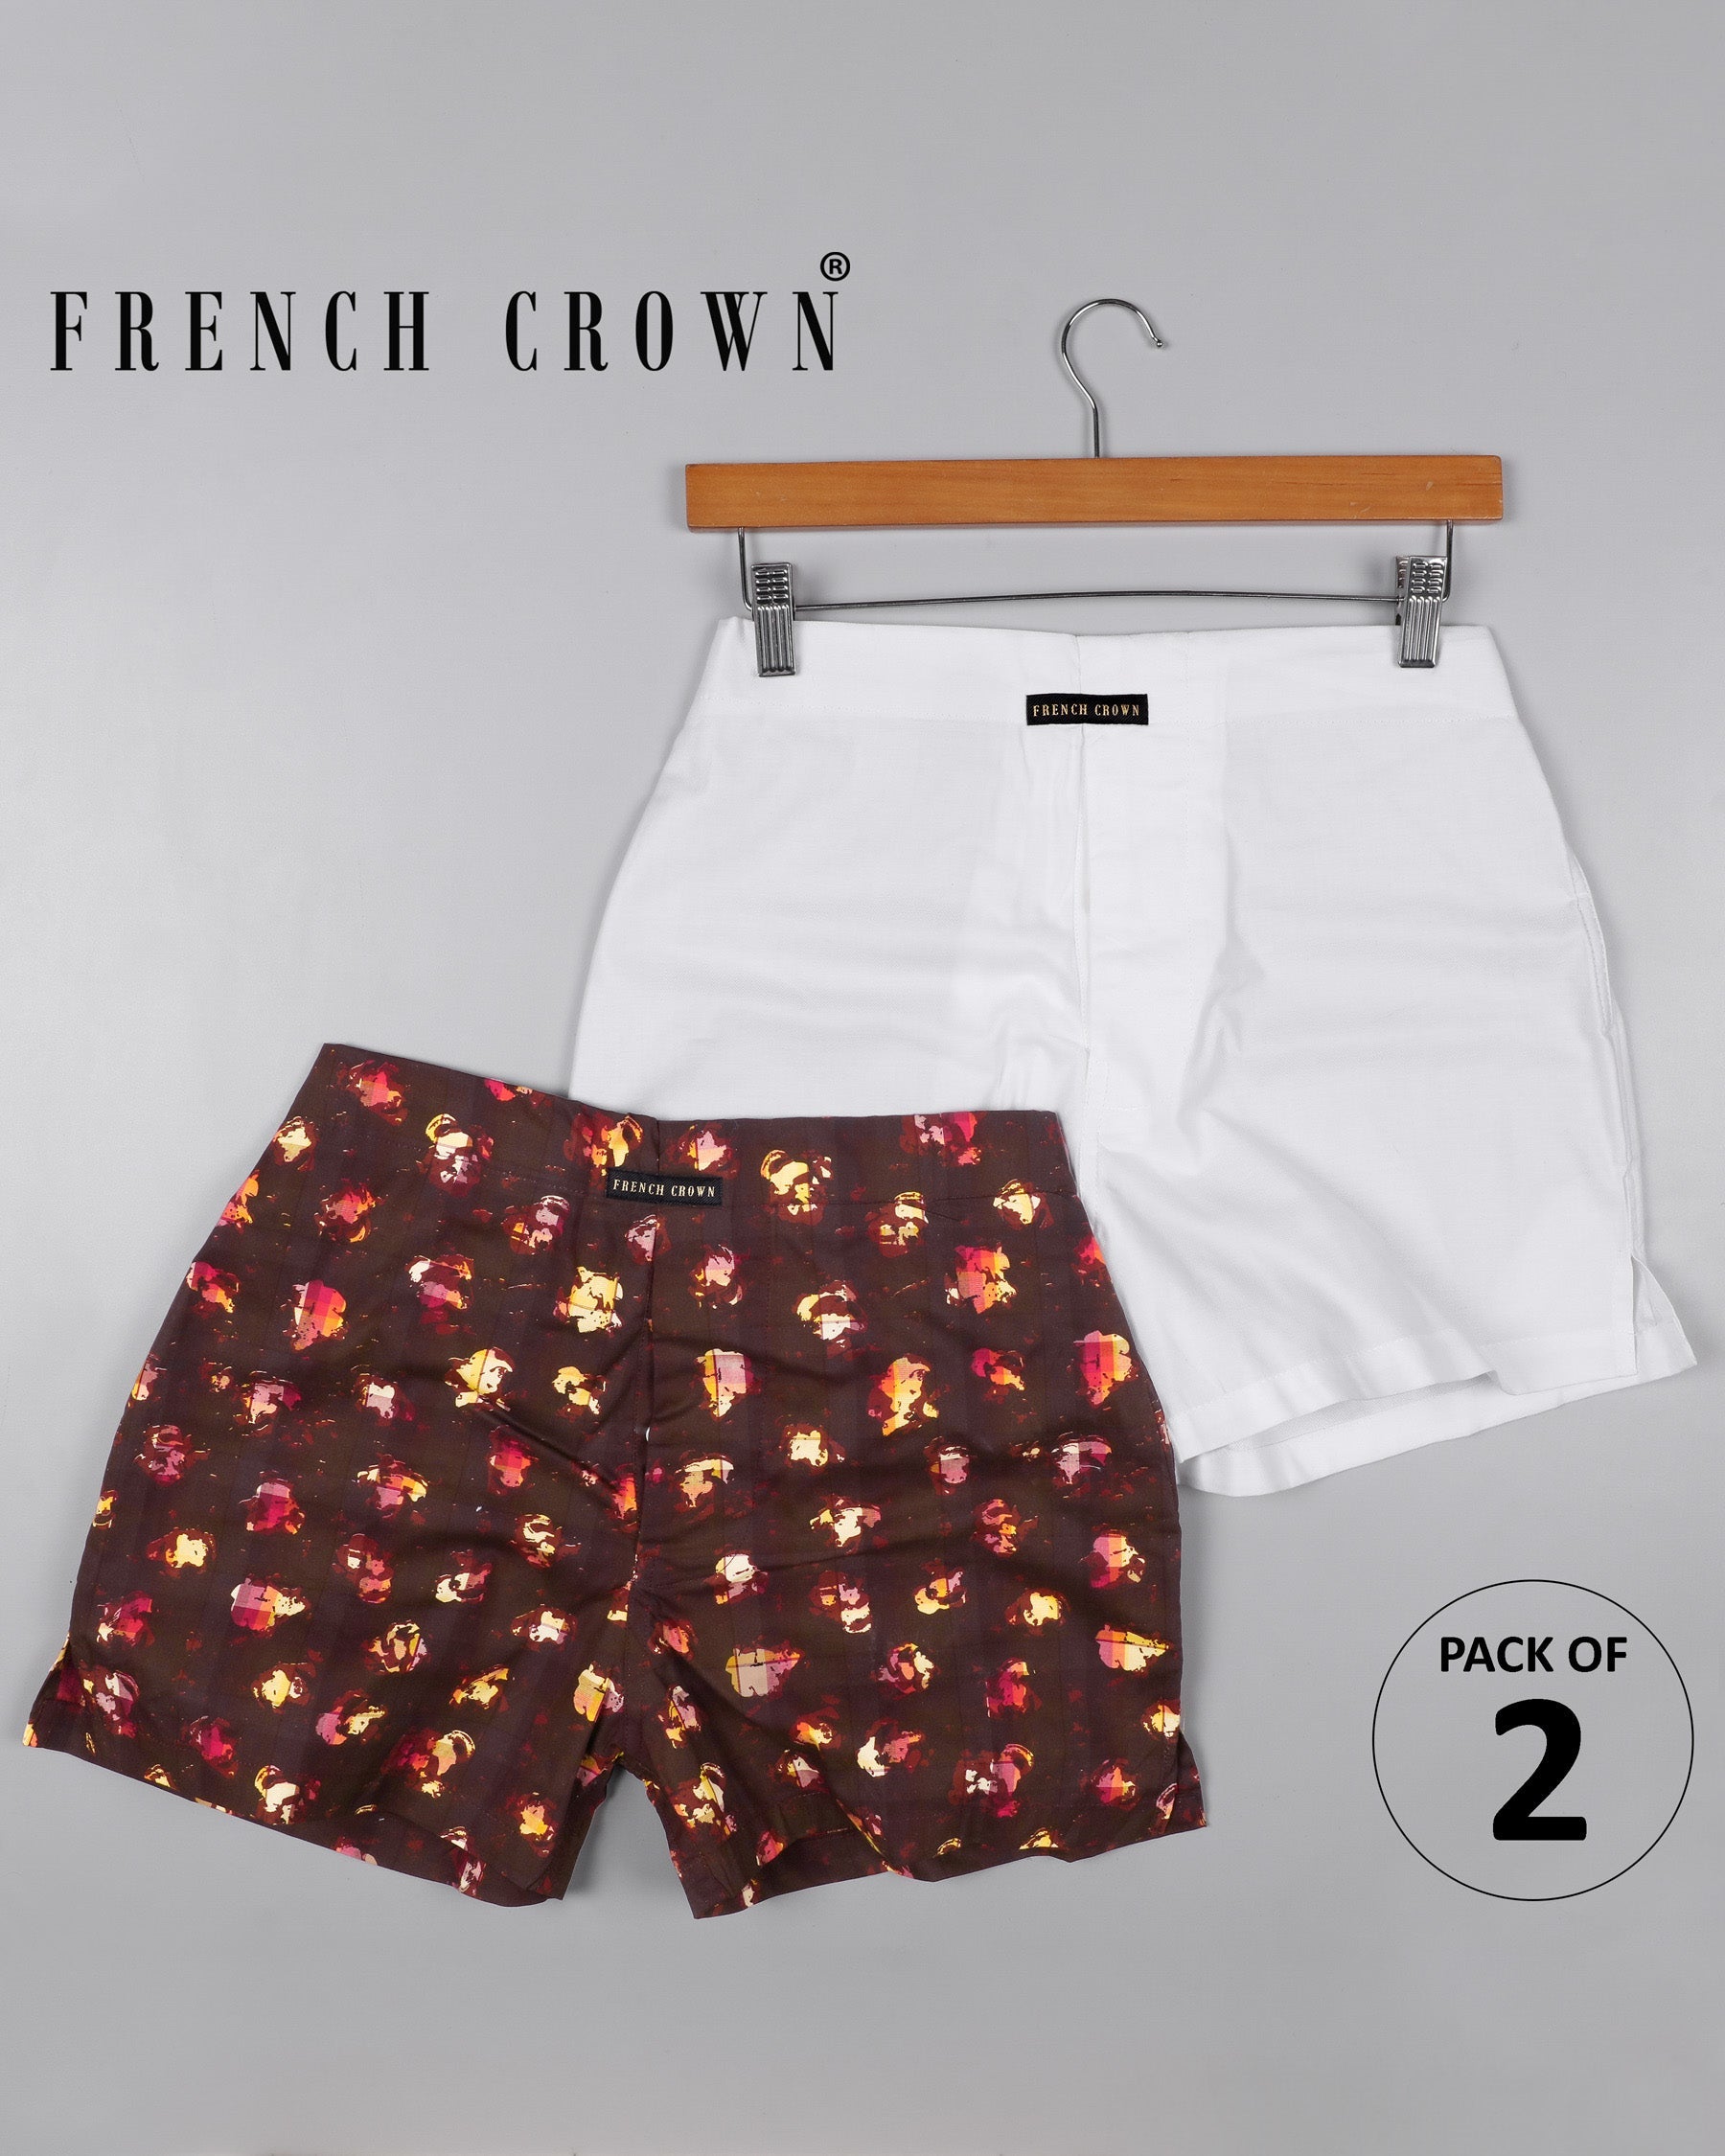 Bright White Dobby and Crater Brown Printed Premium Cotton Boxers CBX342-28, CBX342-30, CBX342-32, CBX342-34, CBX342-36, CBX342-38, CBX342-40, CBX342-42, CBX342-44